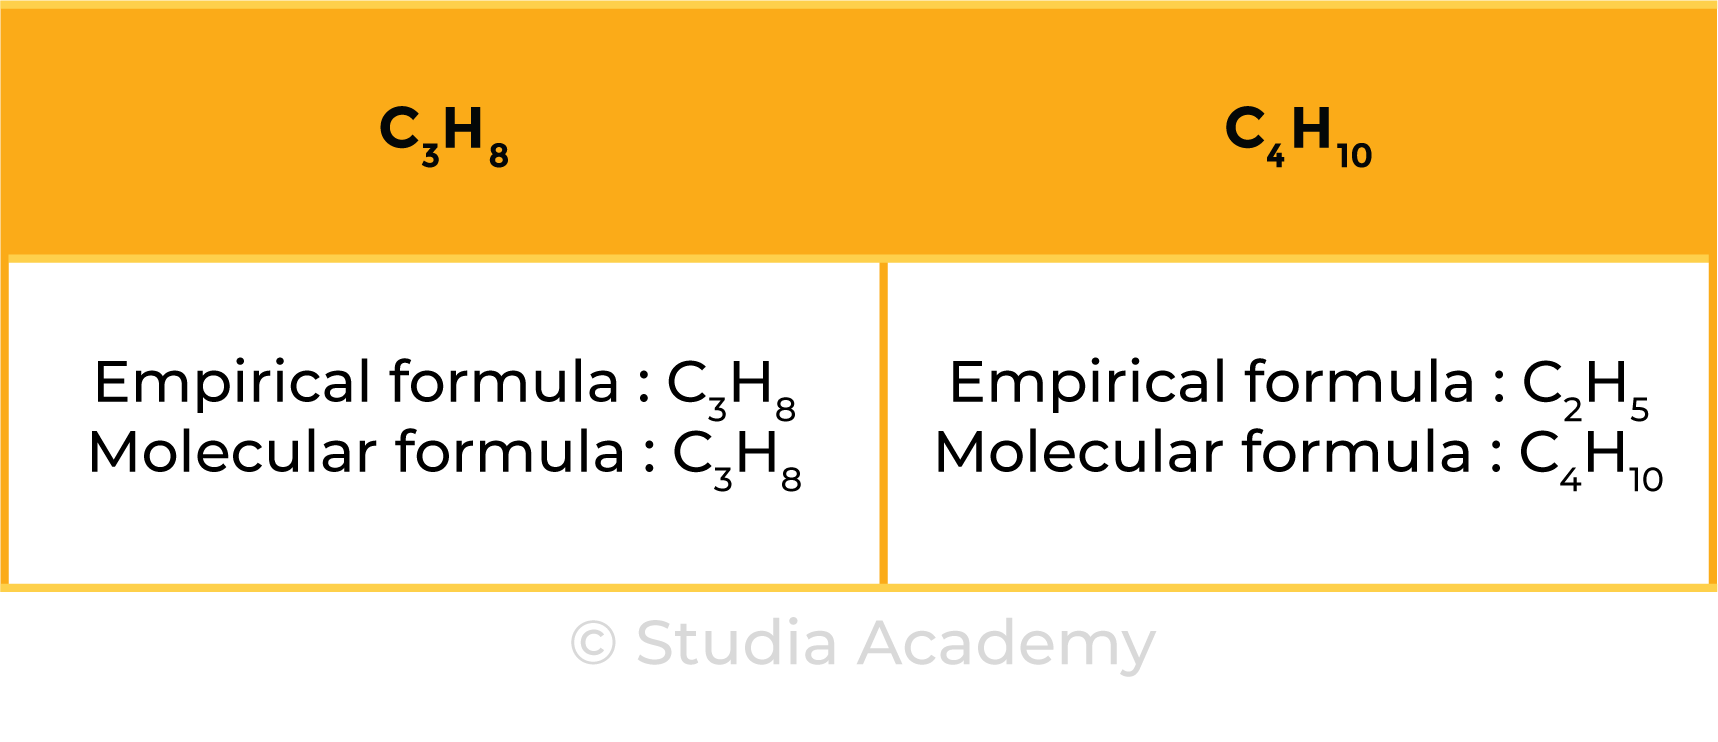 edexcel_igcse_chemistry_topic 05 tables_chemical formulae, equations, and calculations_005_empirical and molecular formula